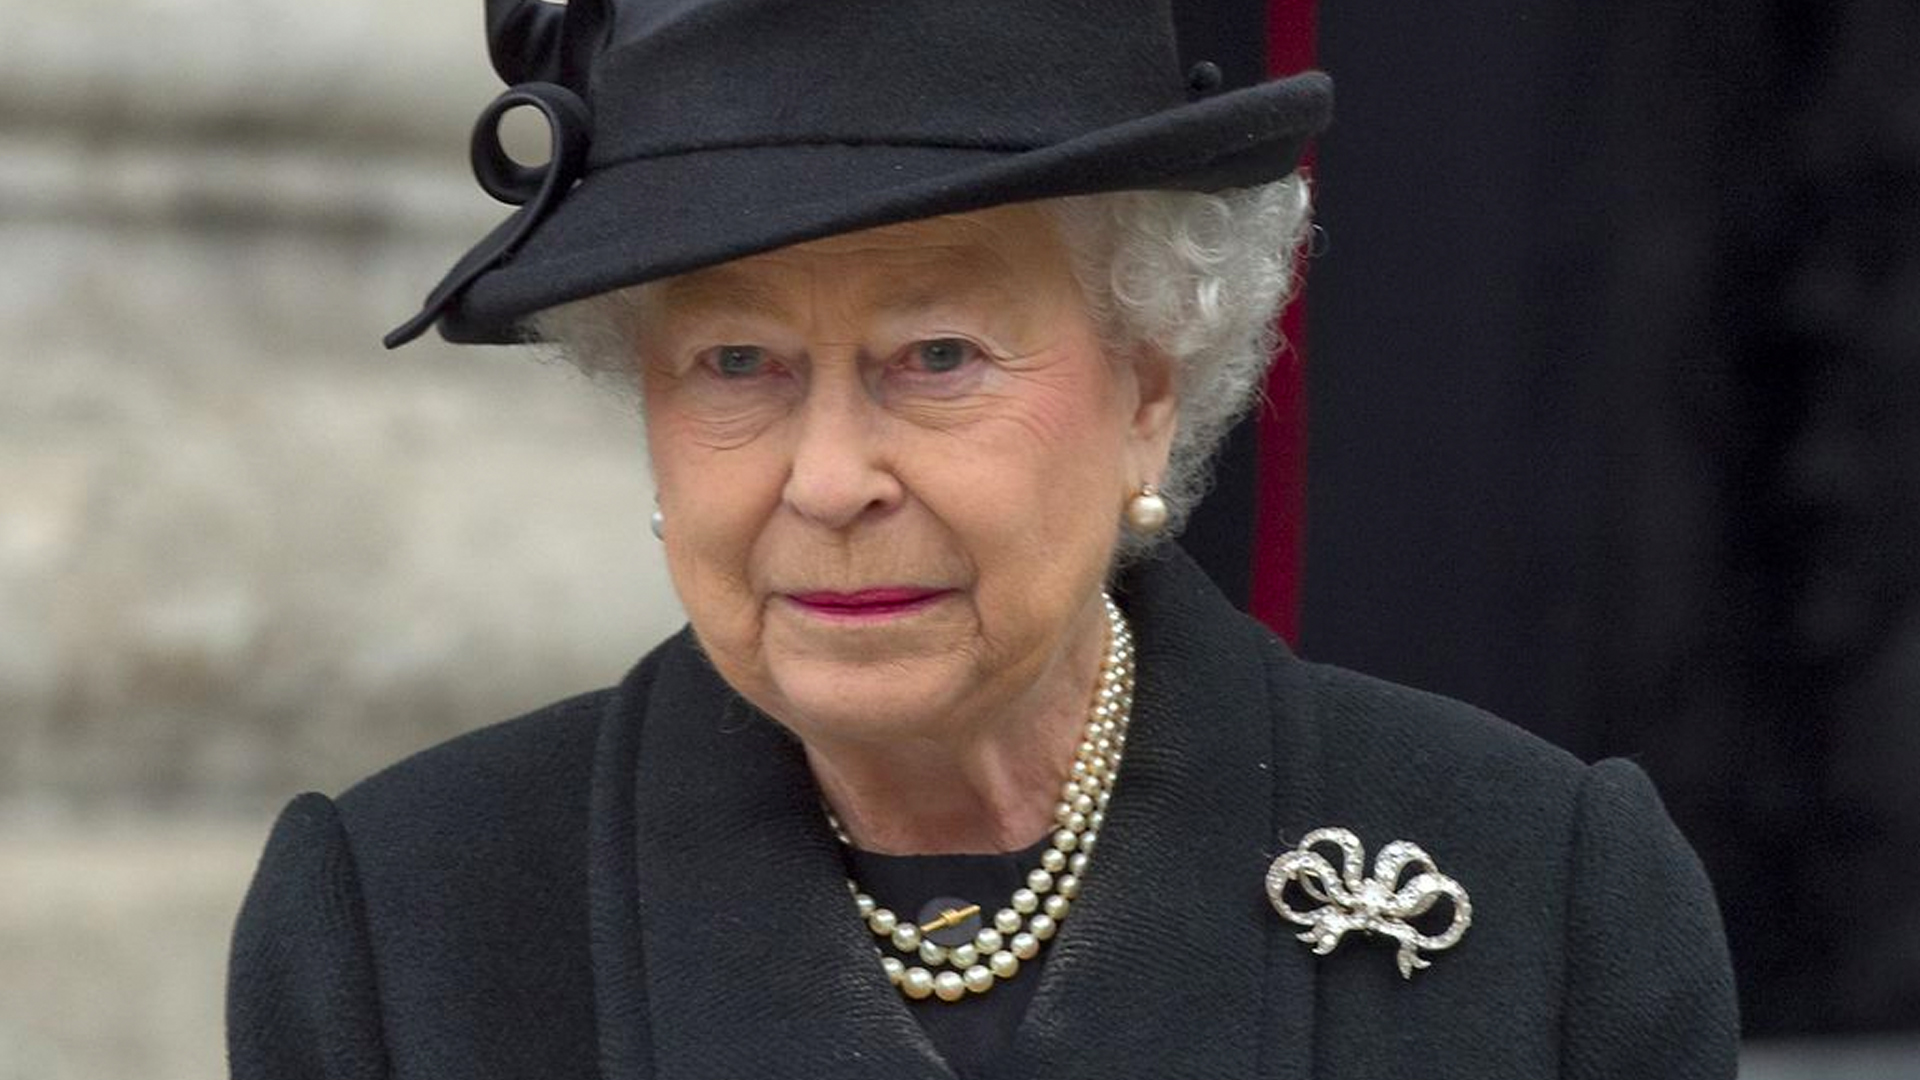 Queen Elizabeth turns 95 just days after Prince Philip’s funeral